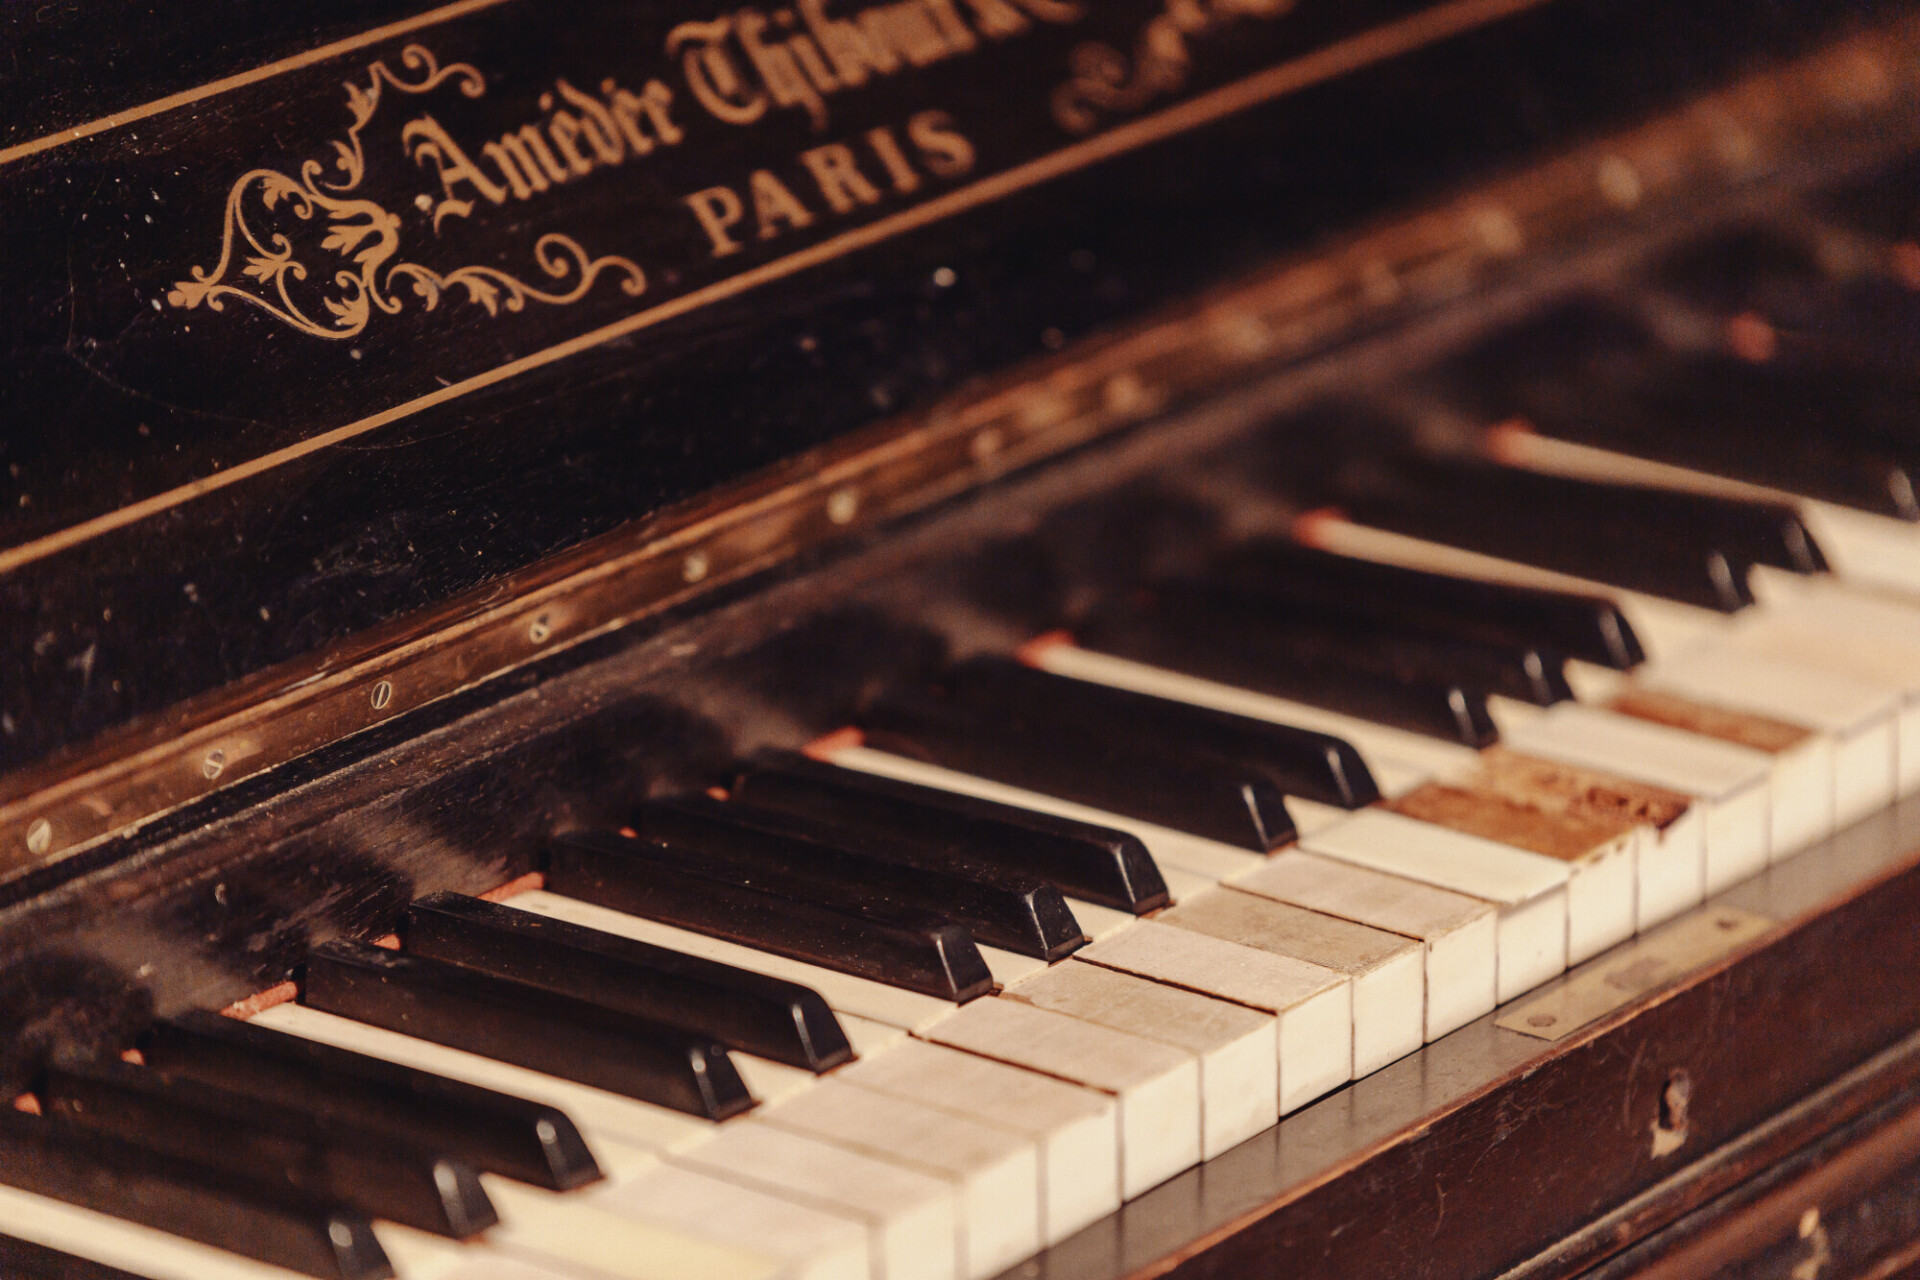 Forgotten Melodies: Old Piano in an Abandoned Setting